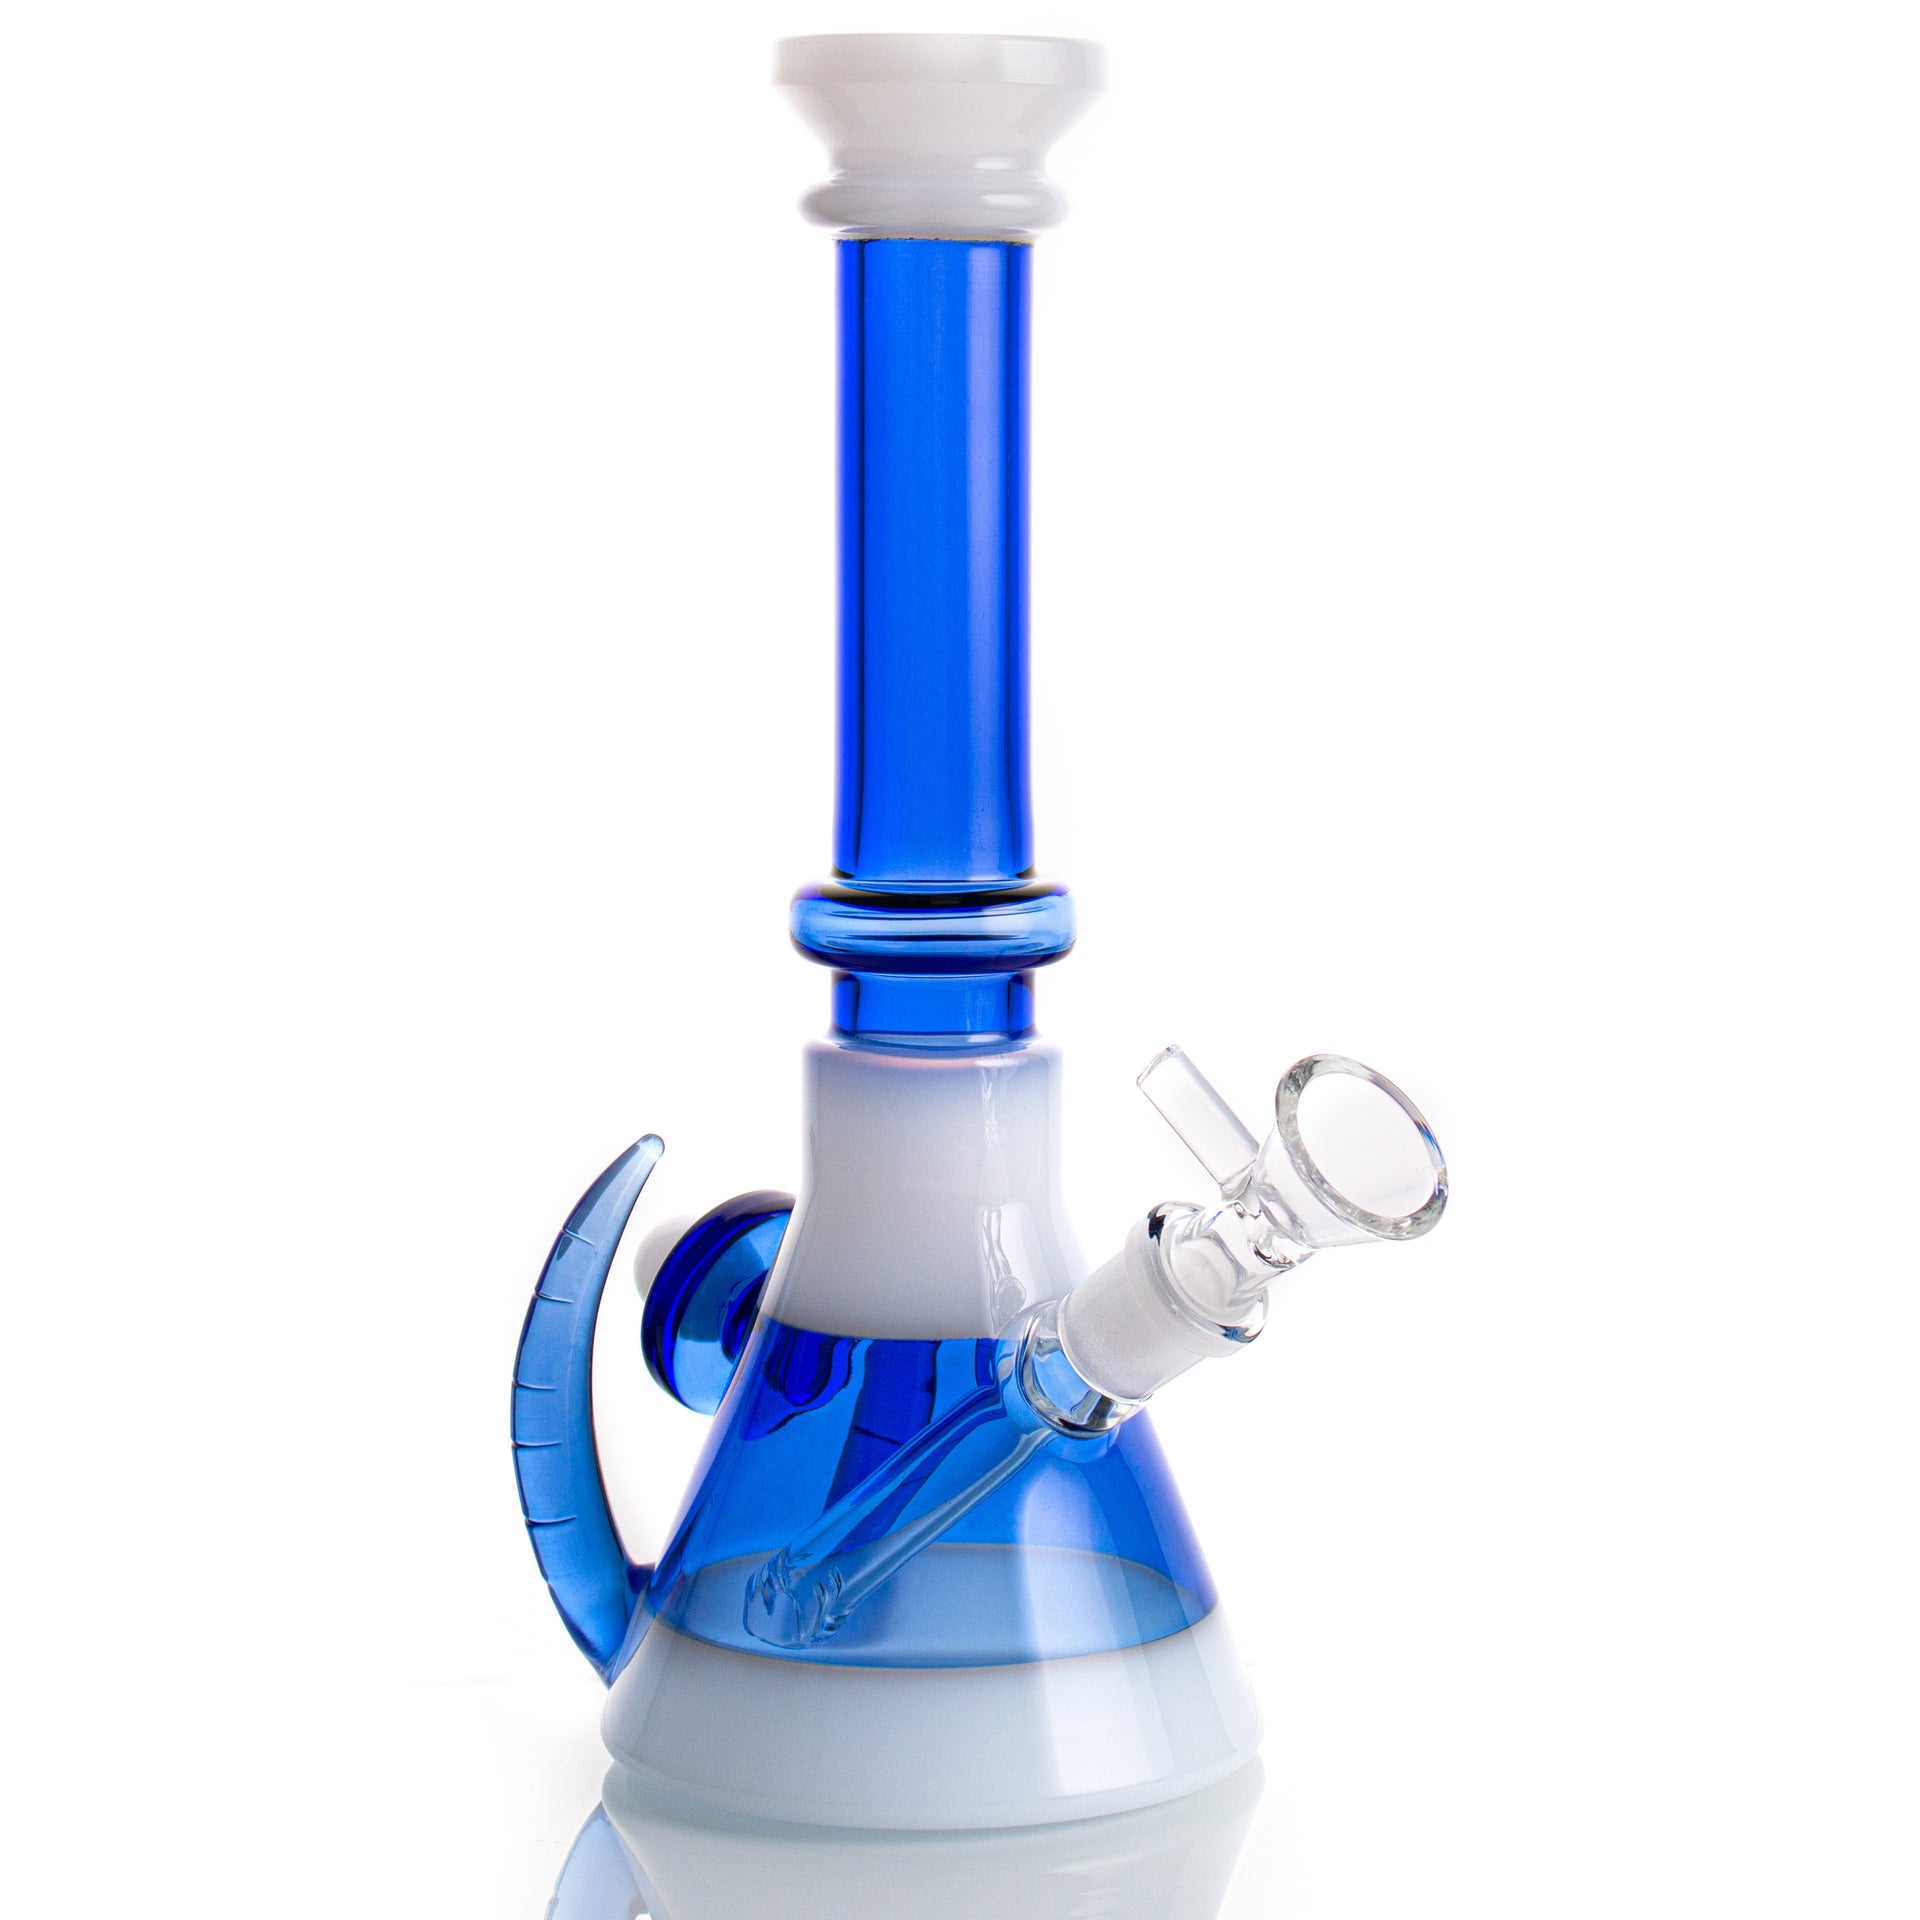 Clear/Blue) Blown Glass Perc Tobacco Water Pipe/Bong Recycler w/ 14mm Bowl